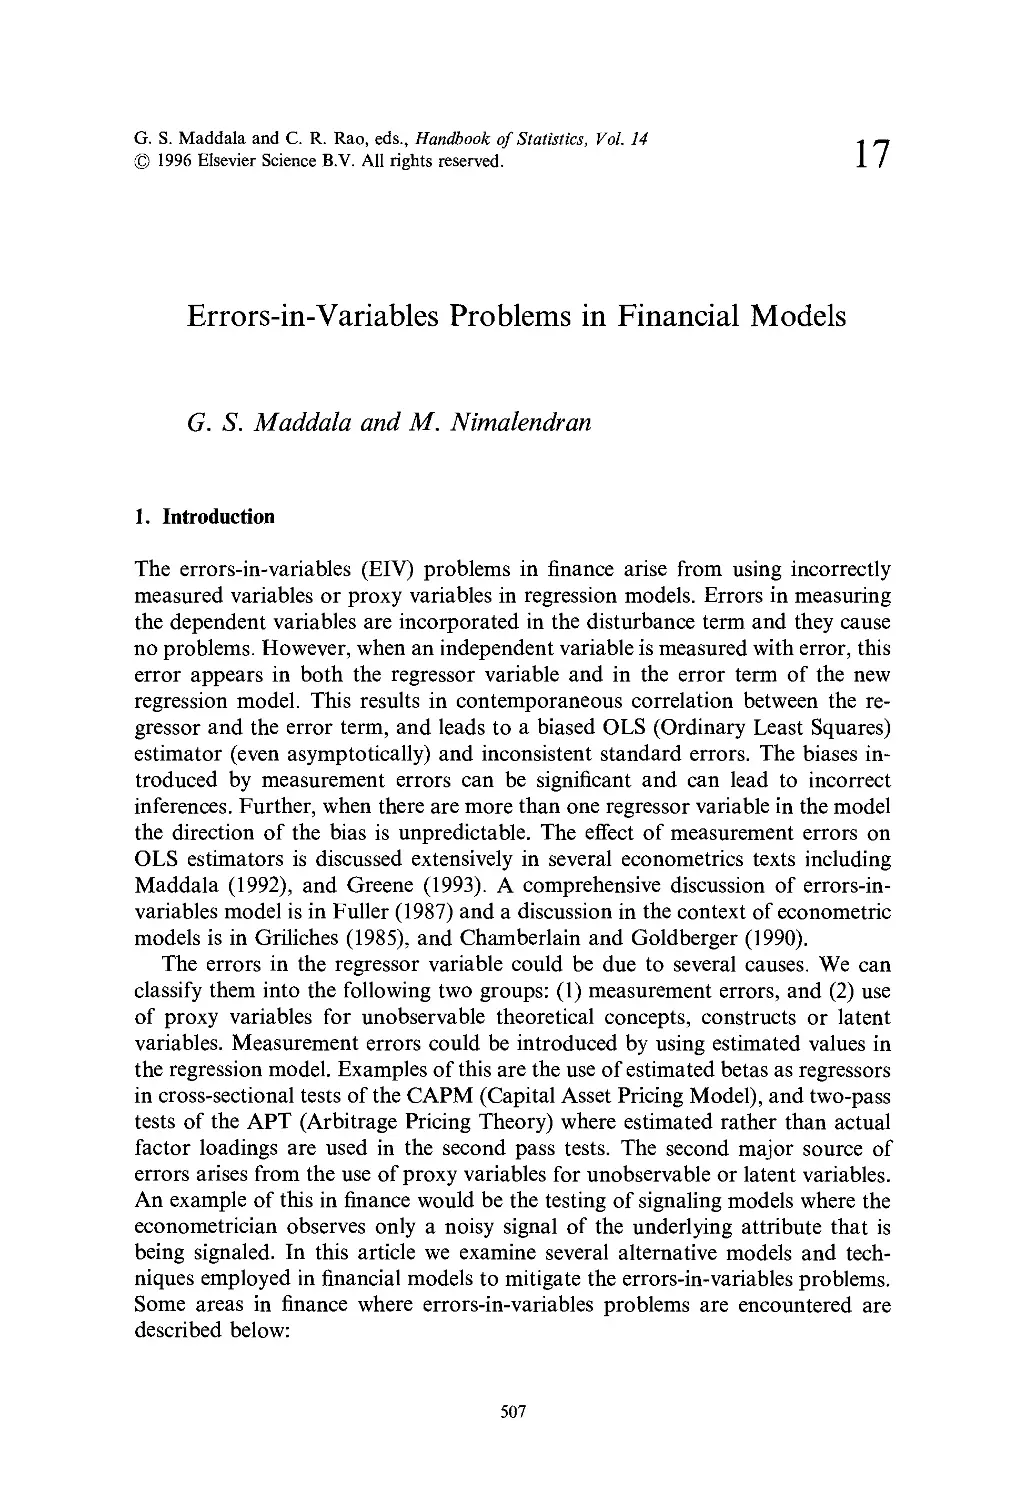 17. Errors-in-Variables Problems in Financial Models